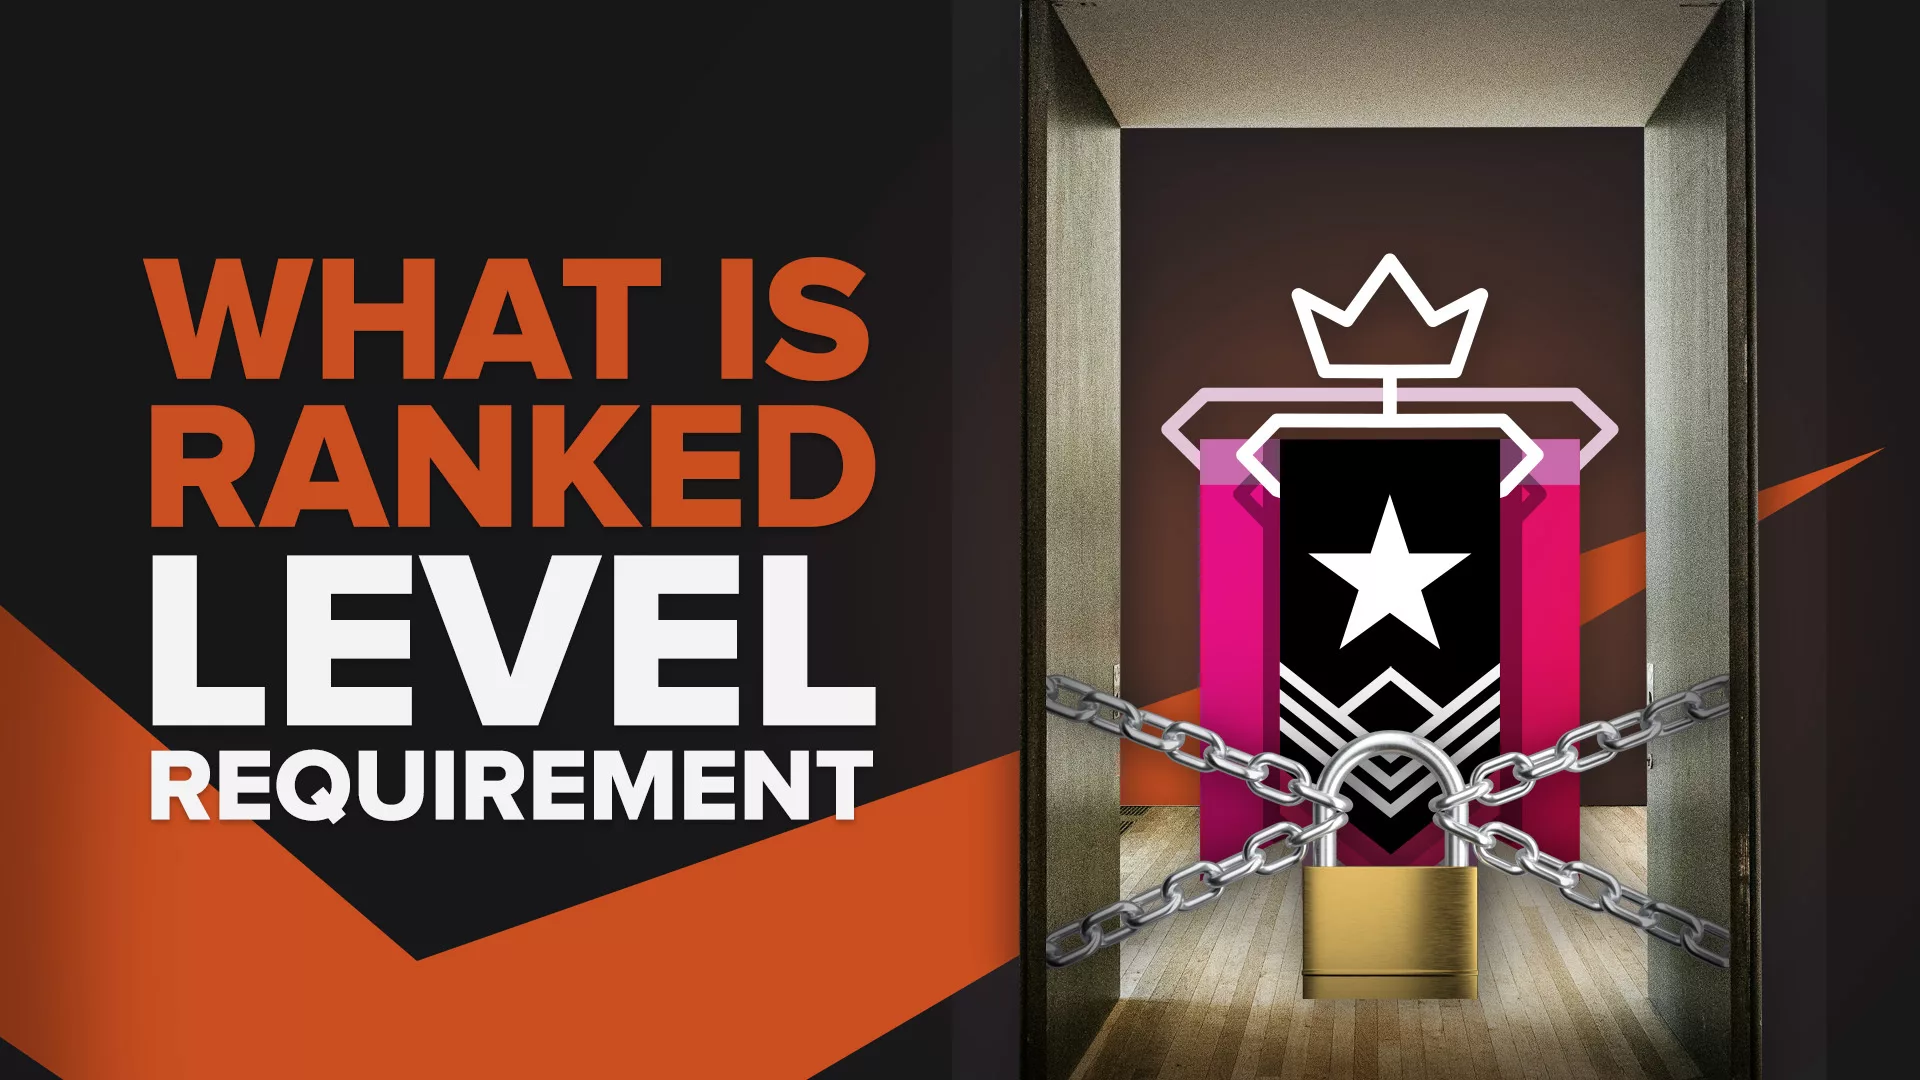 What is the Level Requirement for Ranked in Rainbow: Six Siege? | The Final Answer